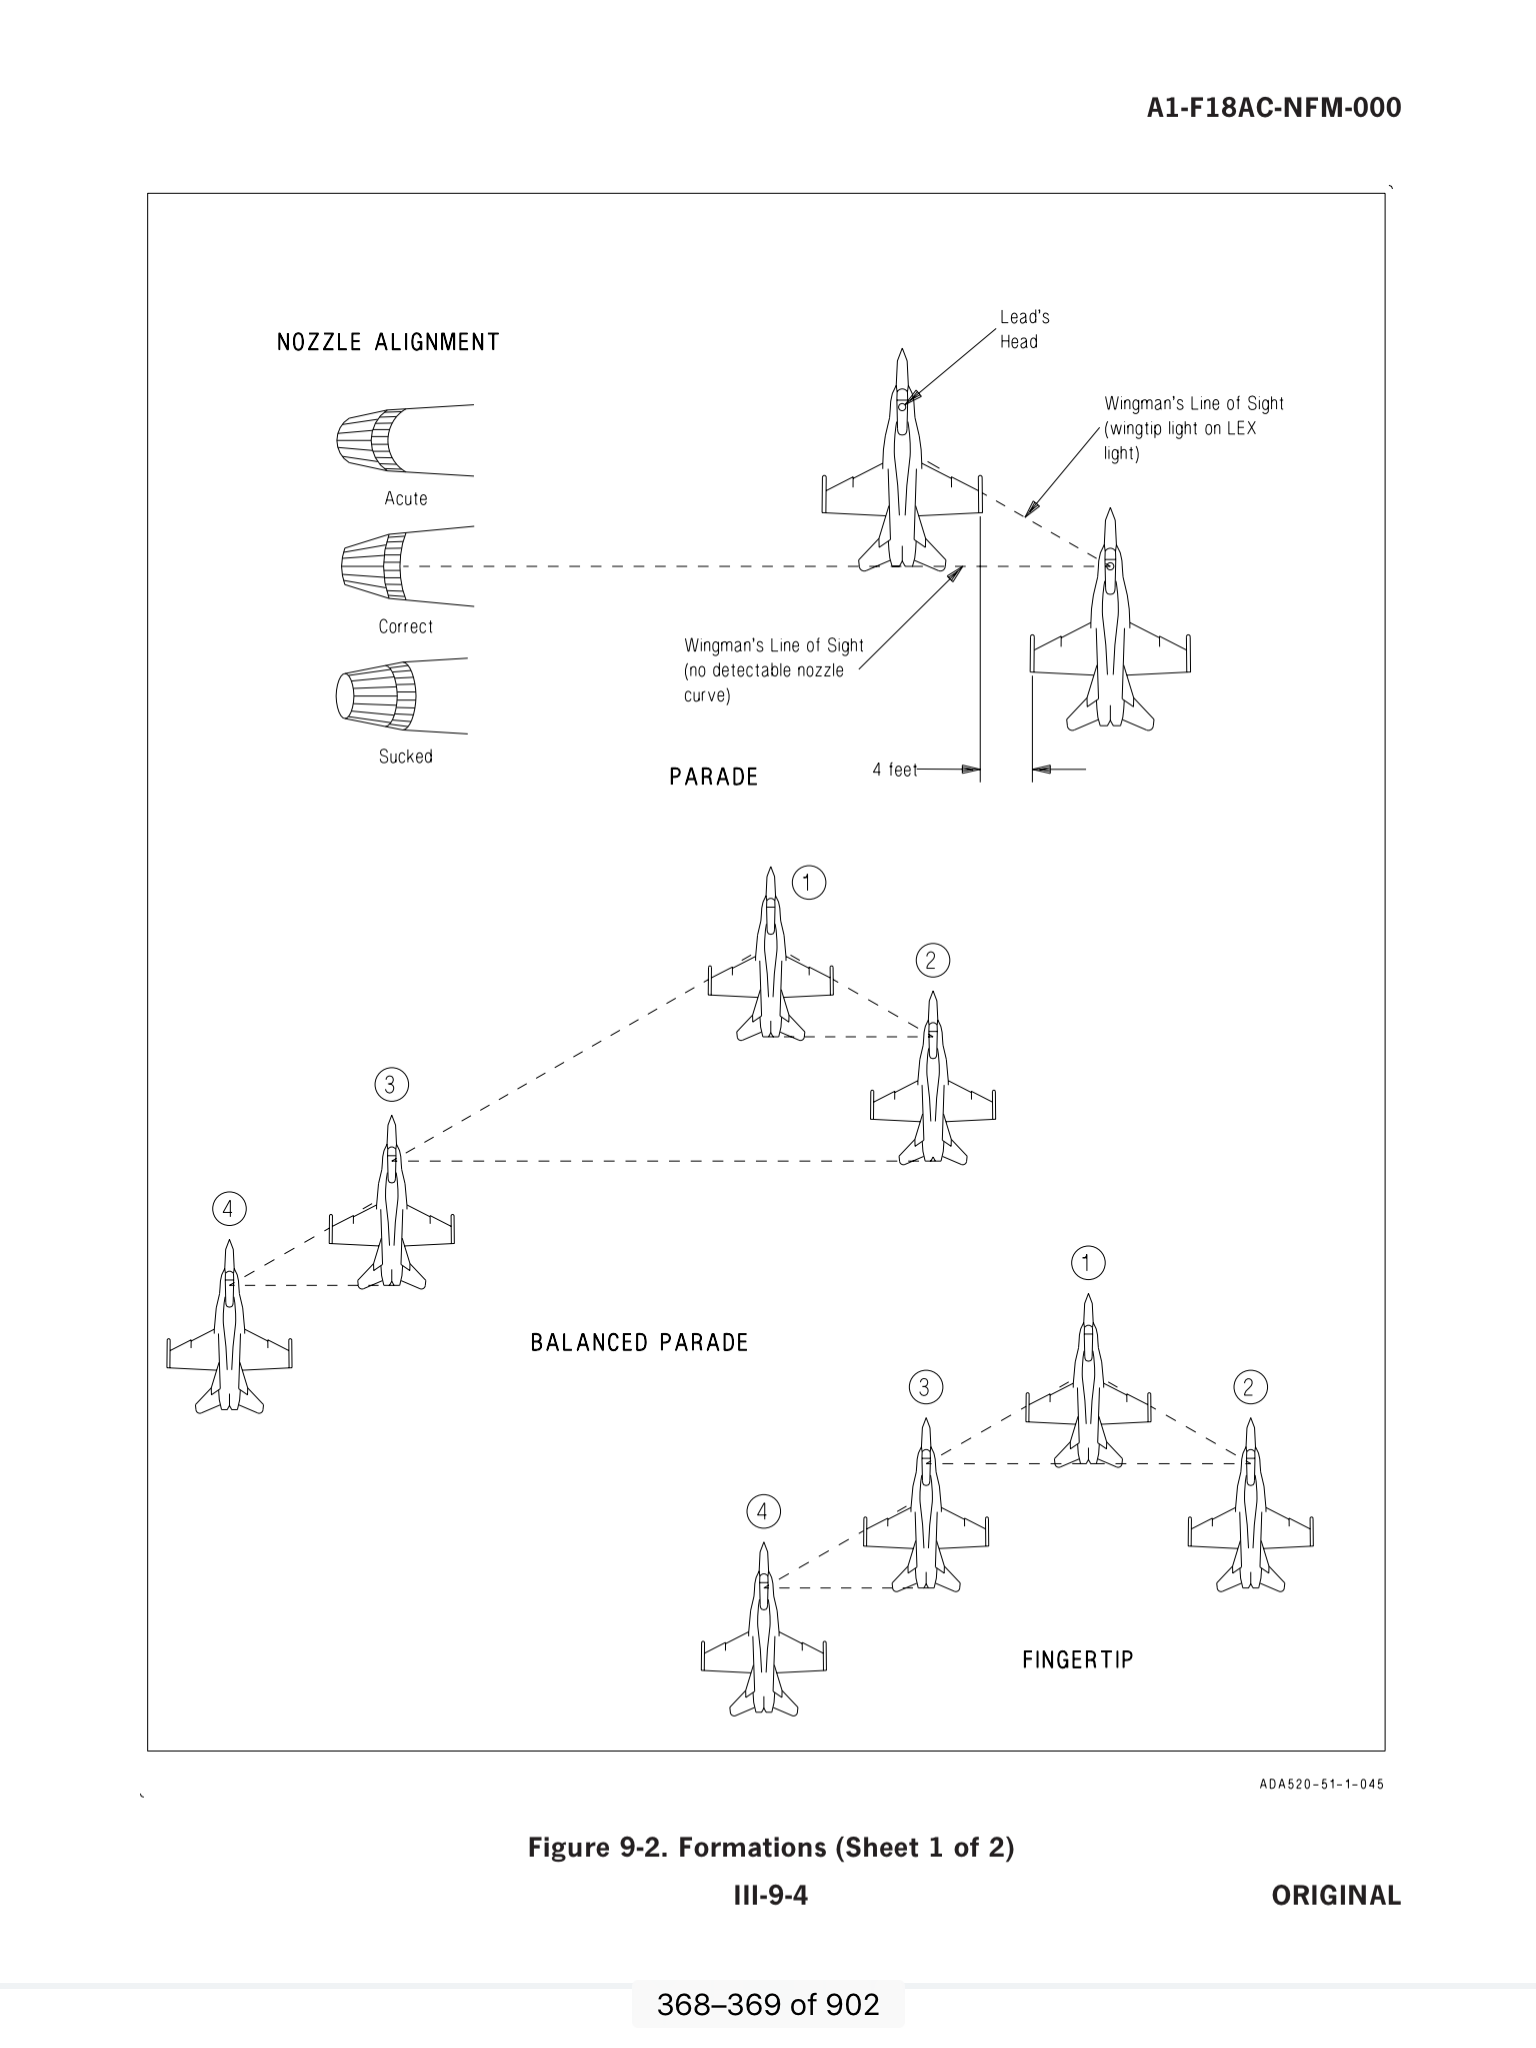 F-18 Formation Positions